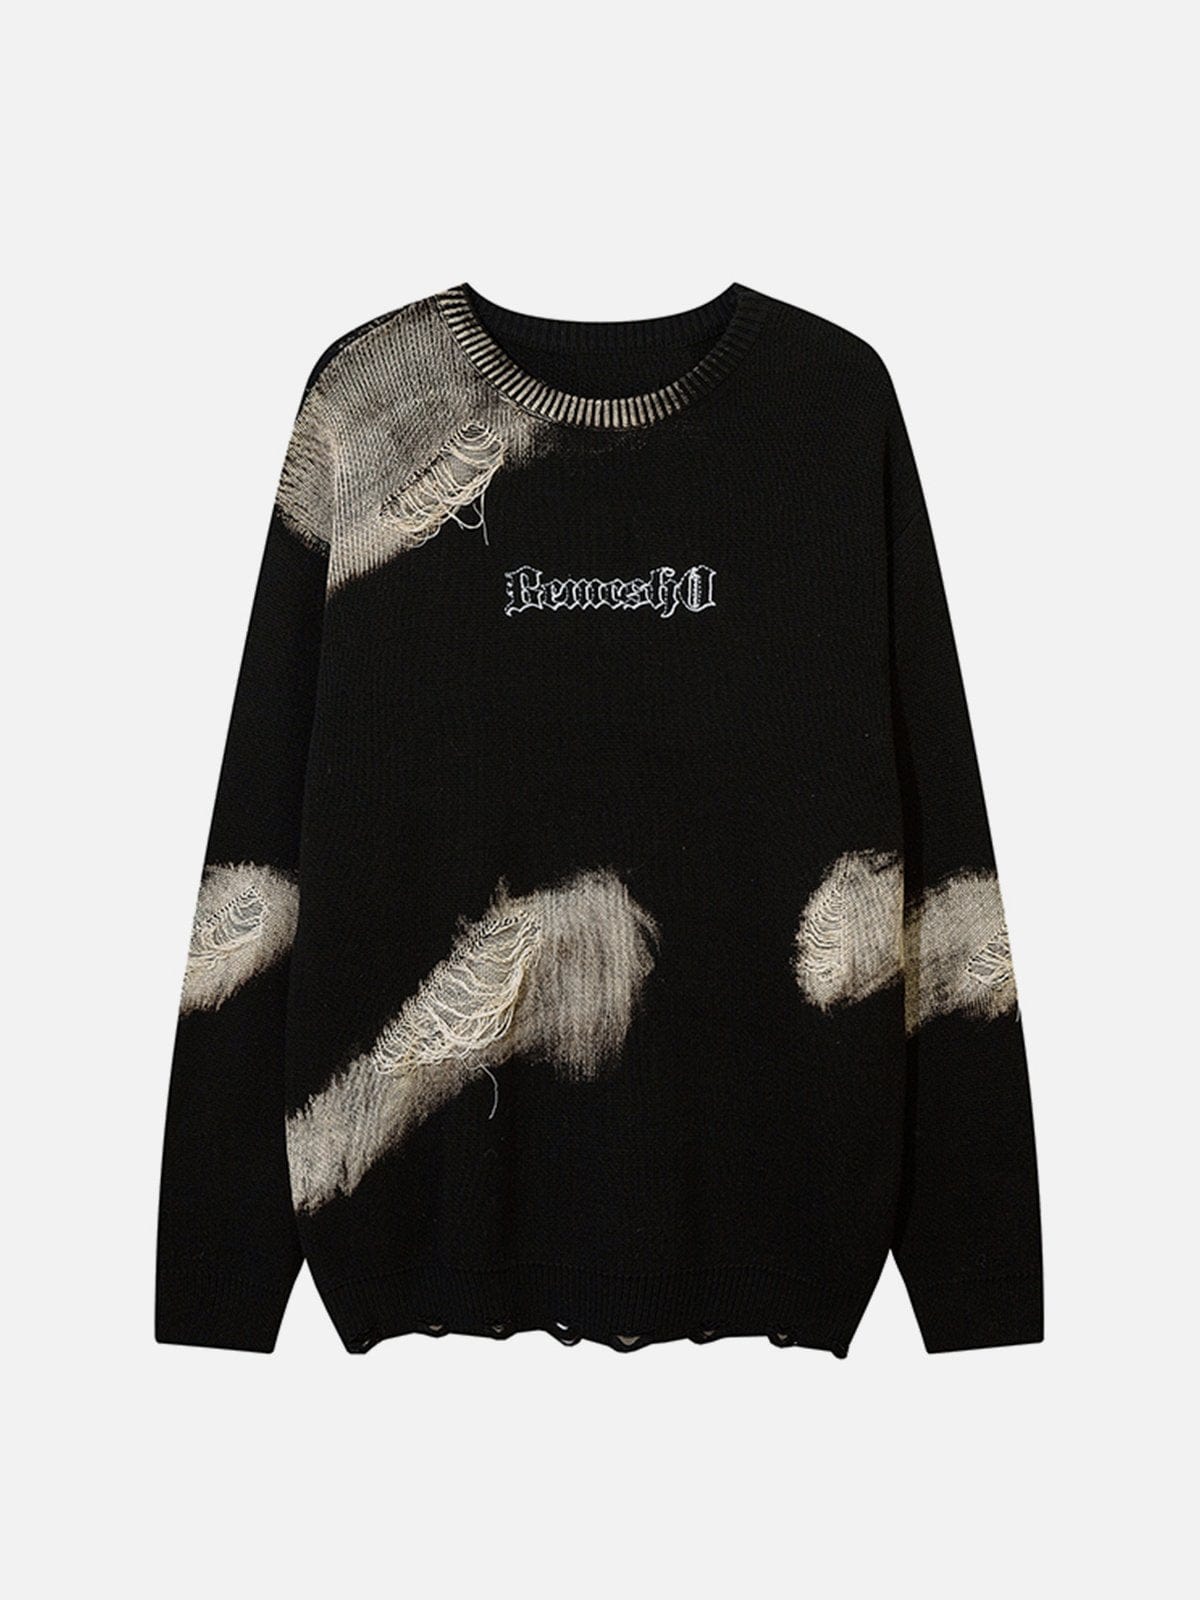 NEV Embroidered Ripped Tassels Sweaters